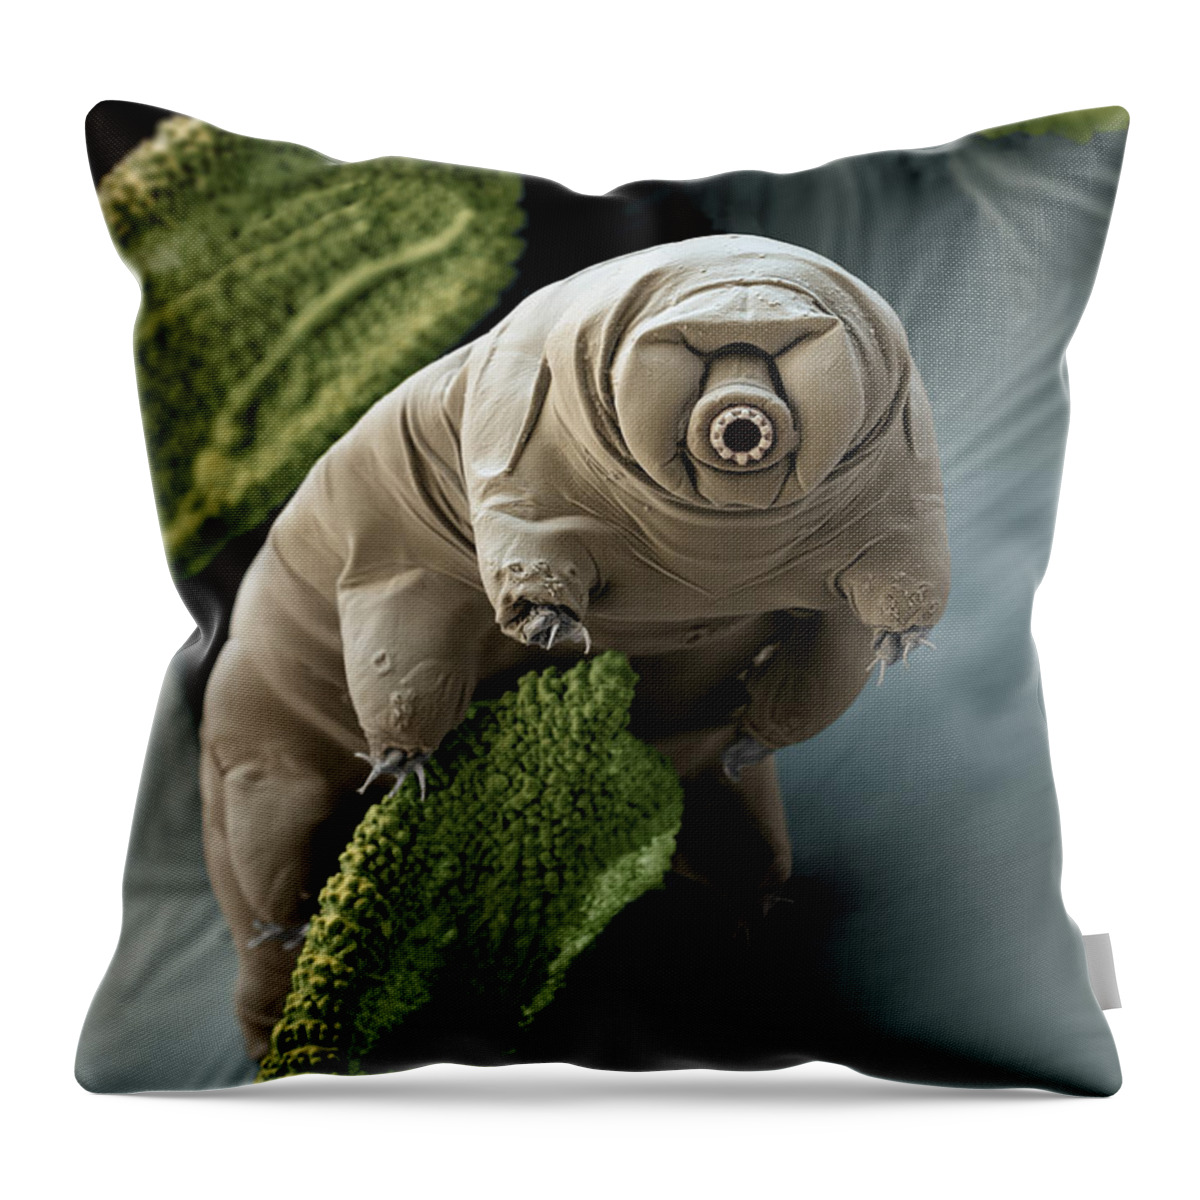 Paramacrobiotus Craterlaki Throw Pillow featuring the photograph Water Bear Or Tardigrade by Eye of Science